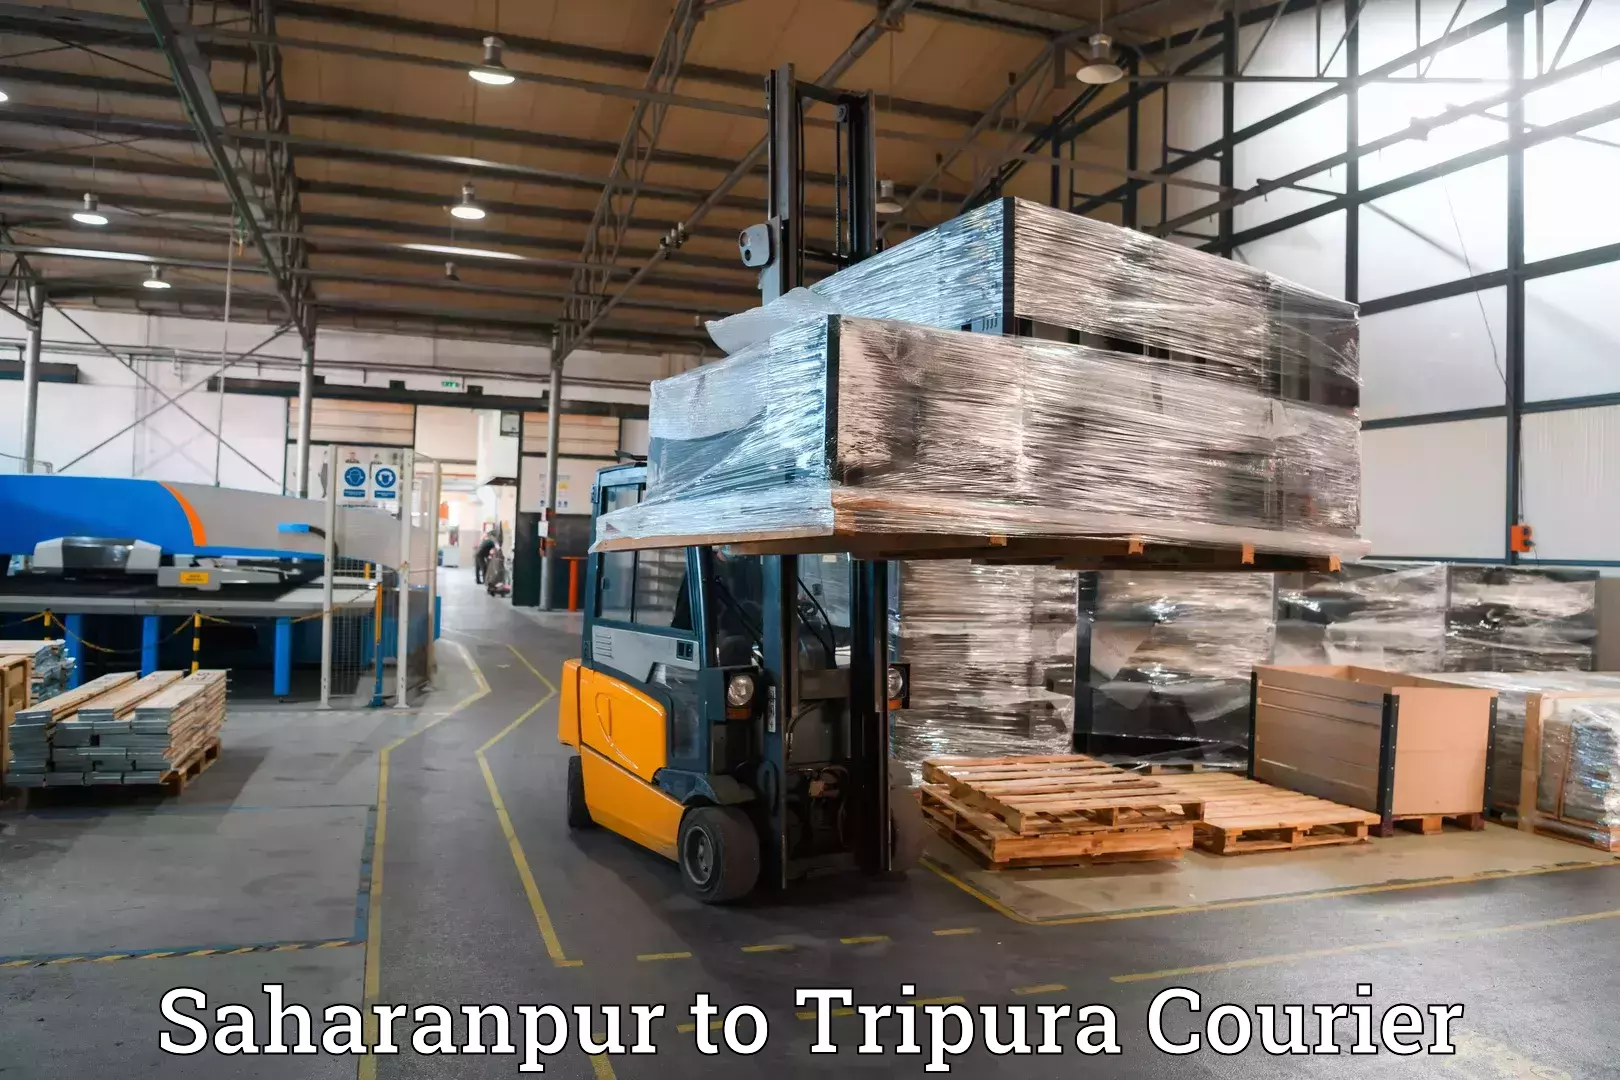 Luggage delivery app Saharanpur to Tripura